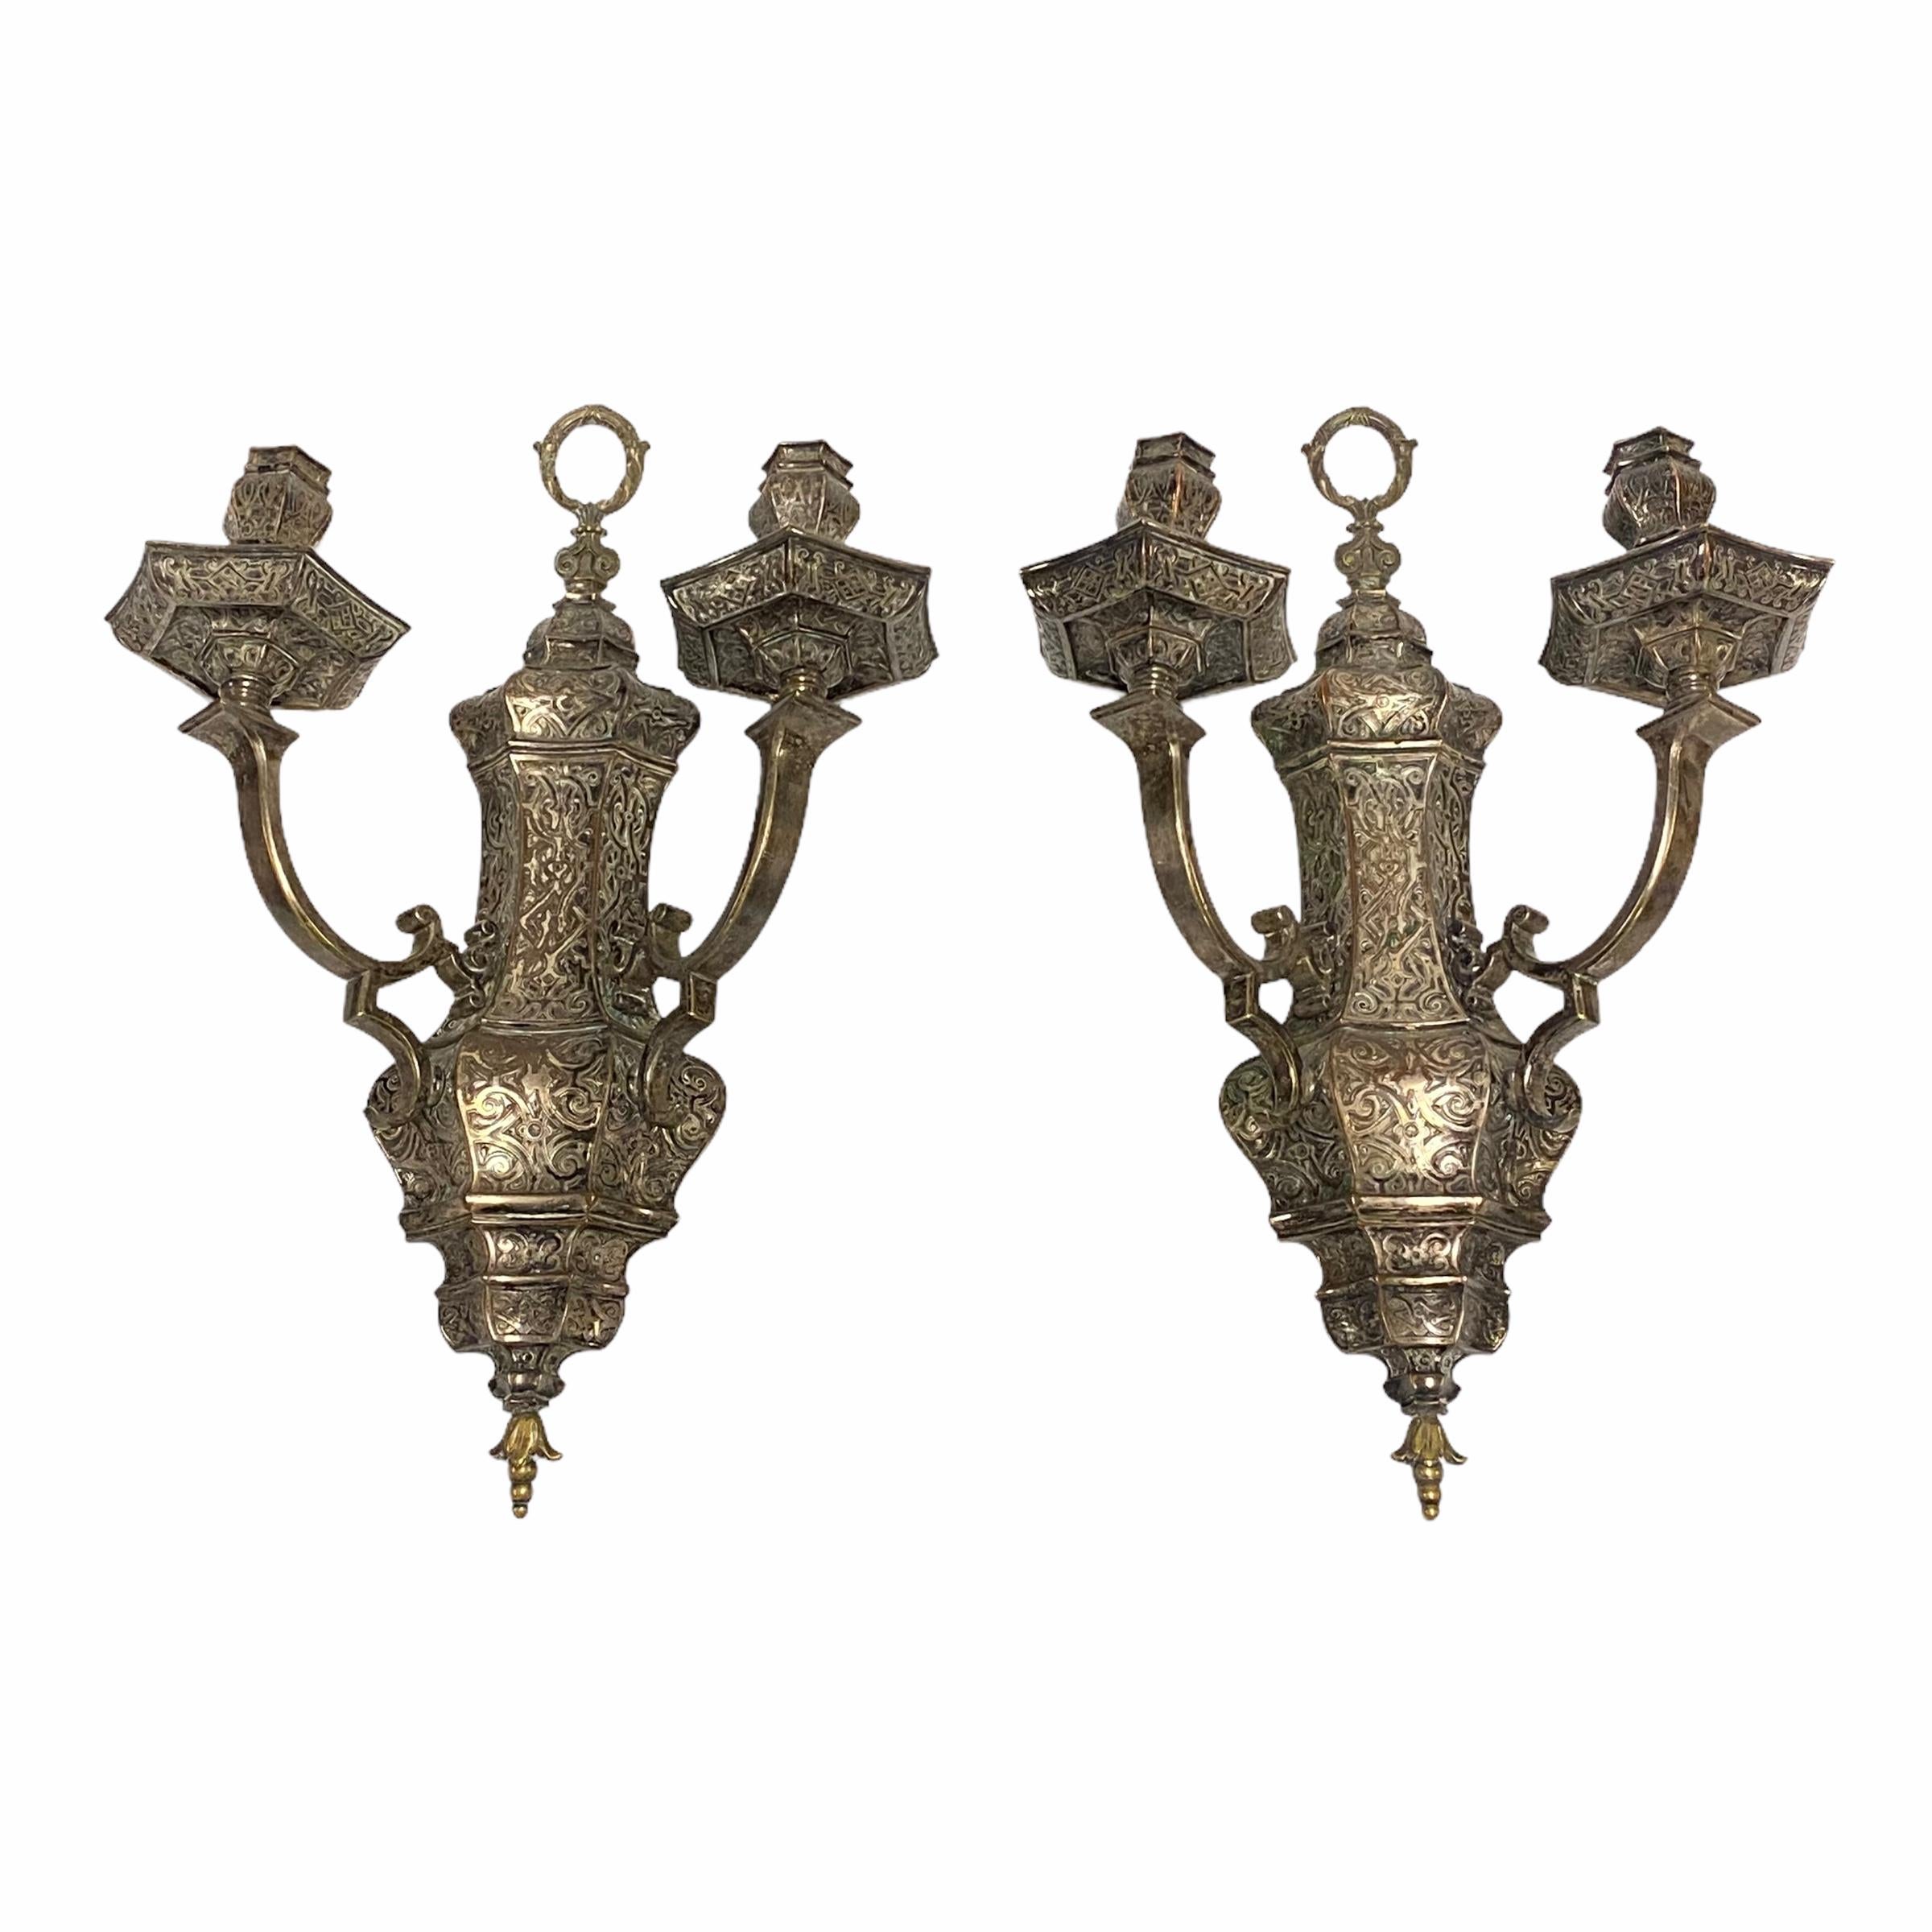 Pair of Moorish style silvered two-light wall sconces attributed to Caldwell & Co.